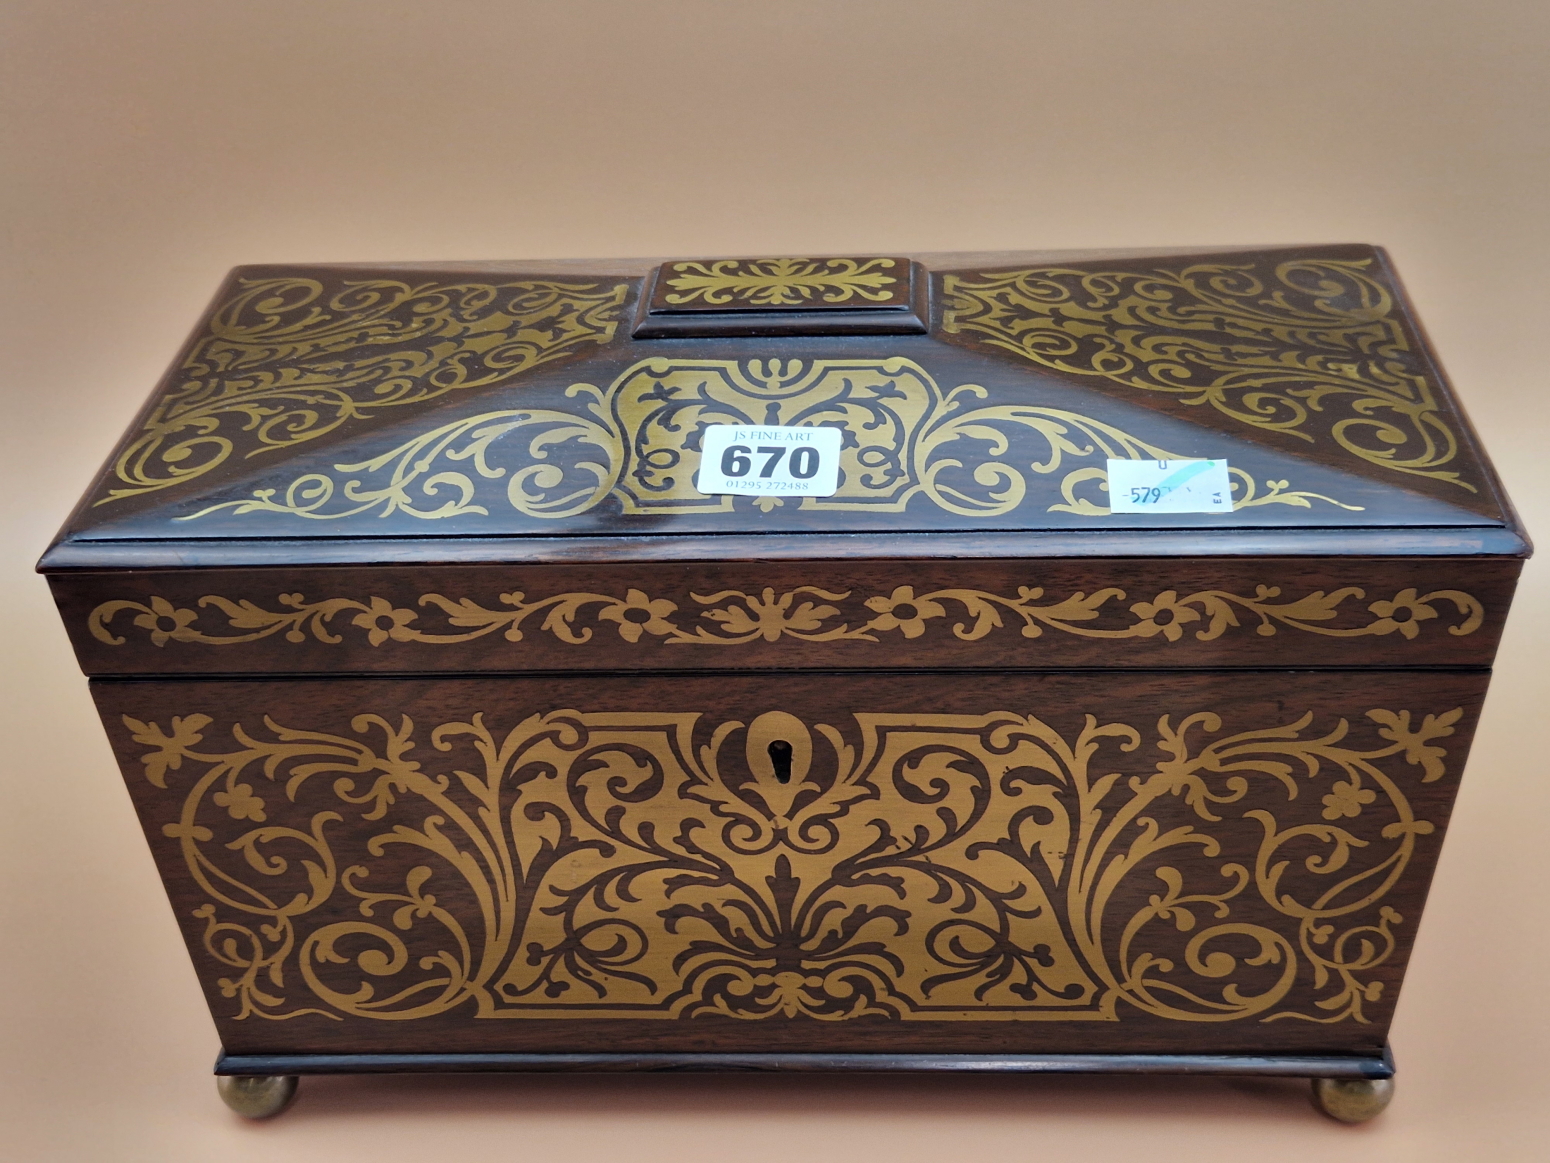 A BRASS INLAID ROSEWOOD SARCOPHAGUS SHAPED REGENCY TEA CADDY CONTAINING TWO CANISTERS AND A GLASS M - Image 4 of 8